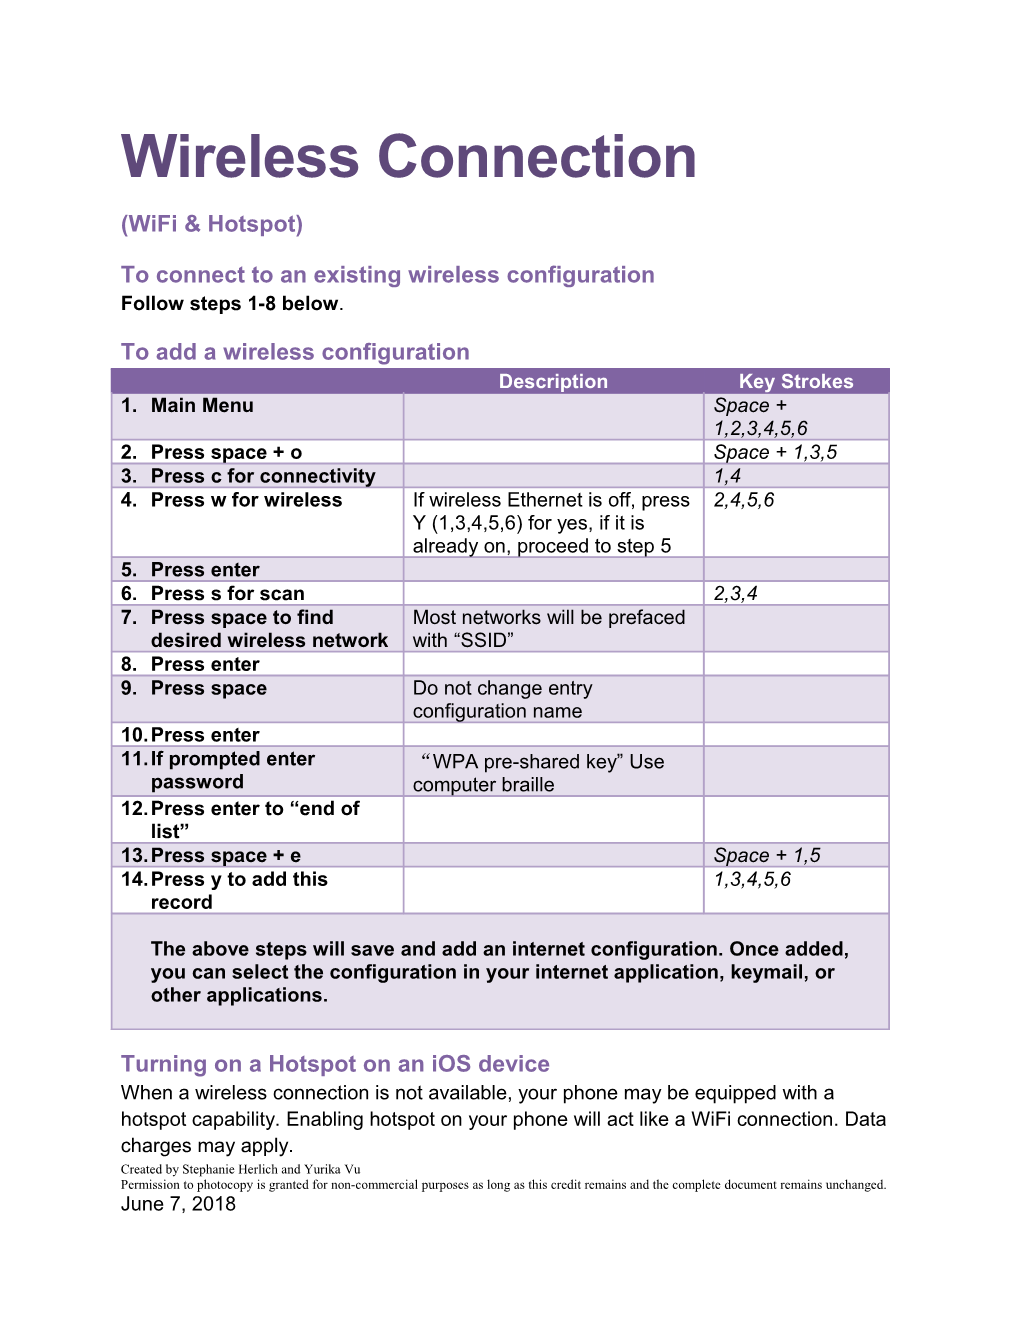 To Connect to an Existing Wireless Configuration